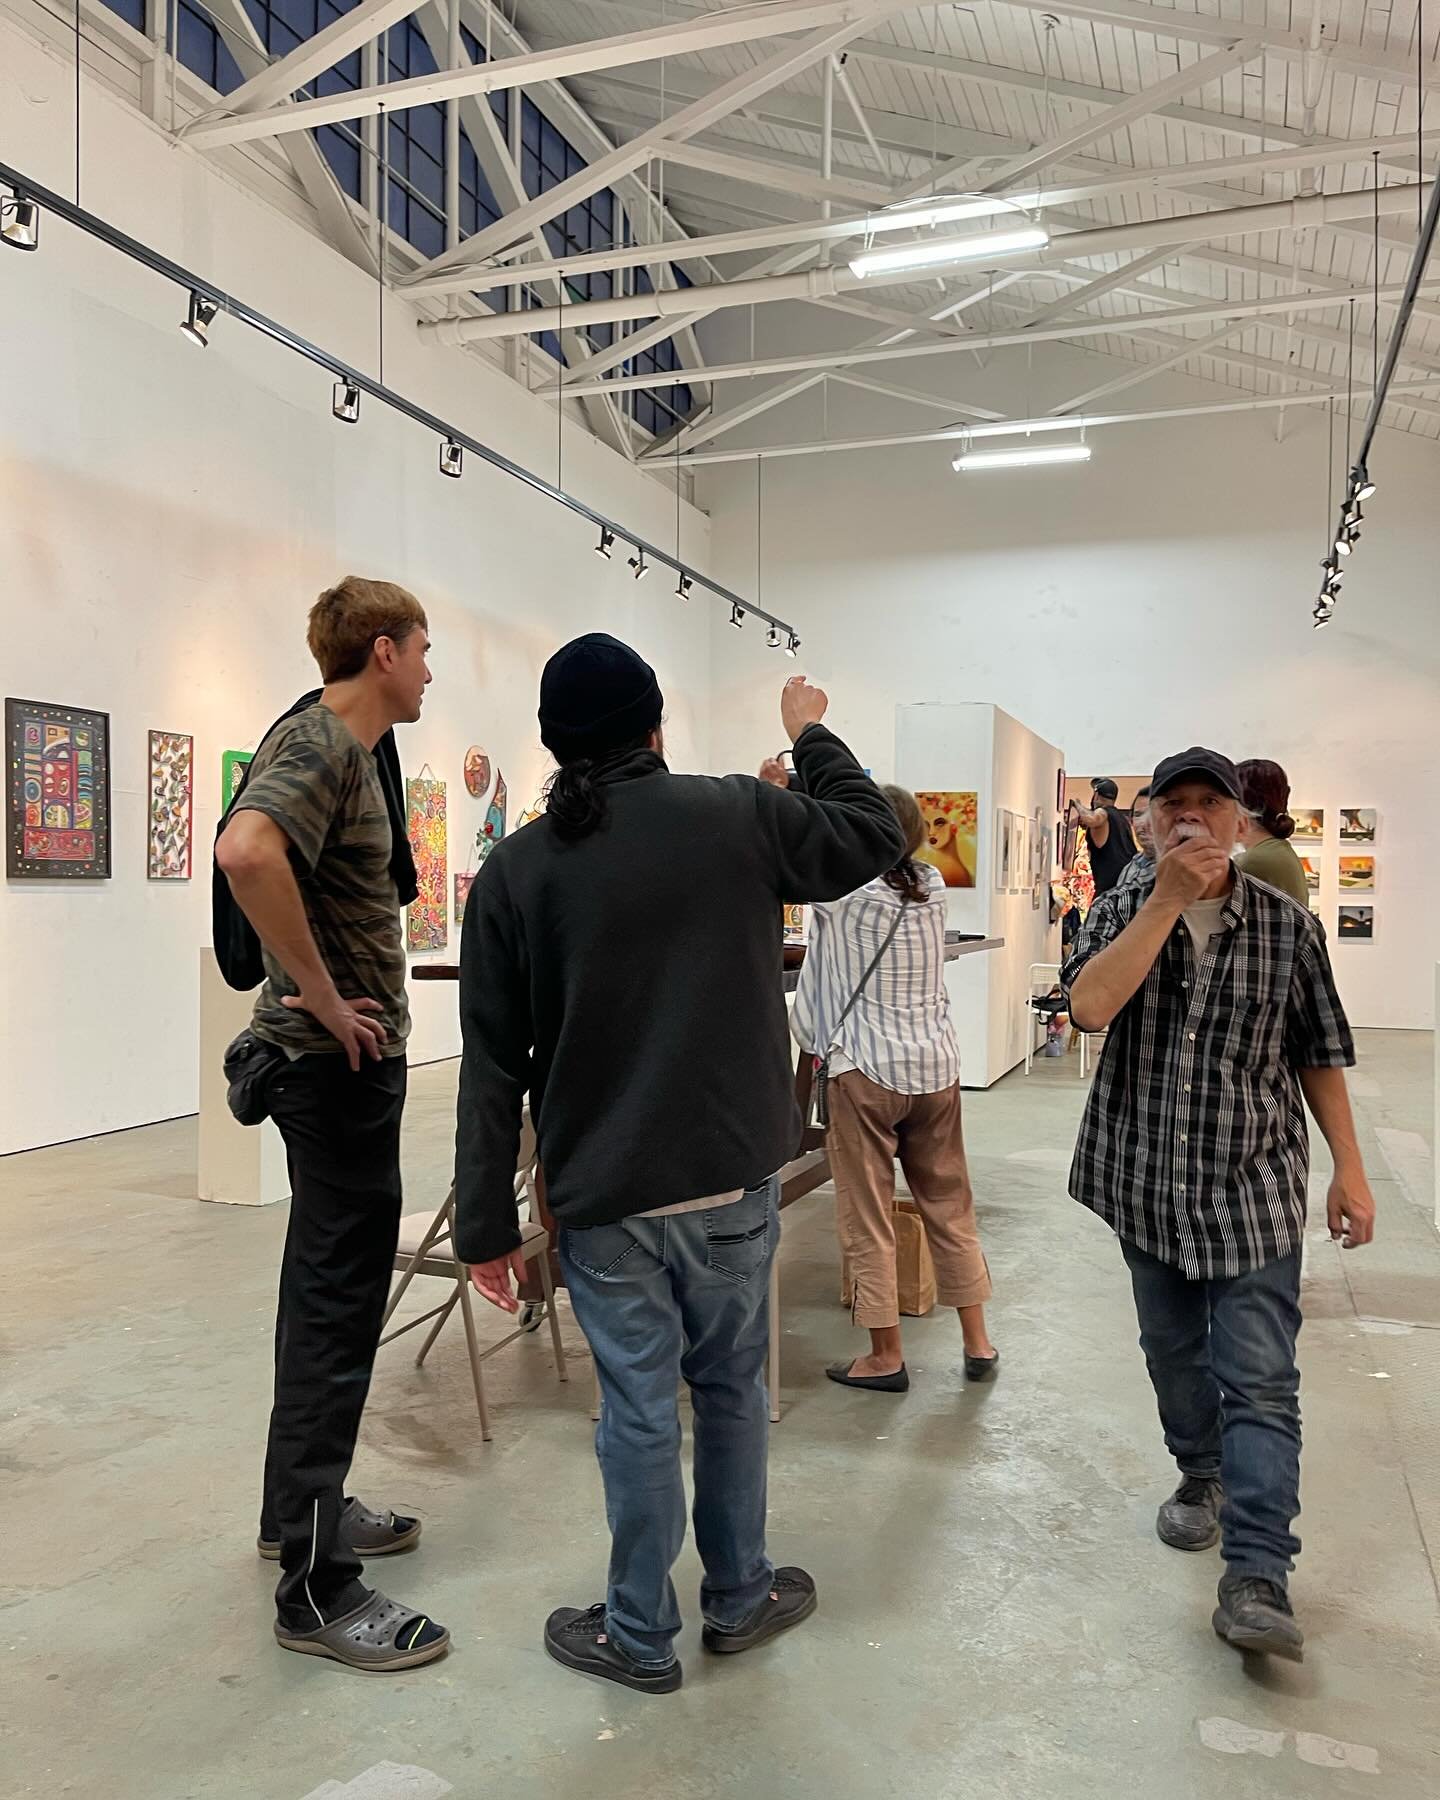 Installation day for our show:

A LOVELY DAY 
featuring our spotlight artist Sean Magic Gil 
along with a collection of supporting Citadel artists. 

Join us for the Opening Reception!

Friday, May 3rd 
5-9 PM 
📍Citadel Gallery 
199 Martha Street 
S